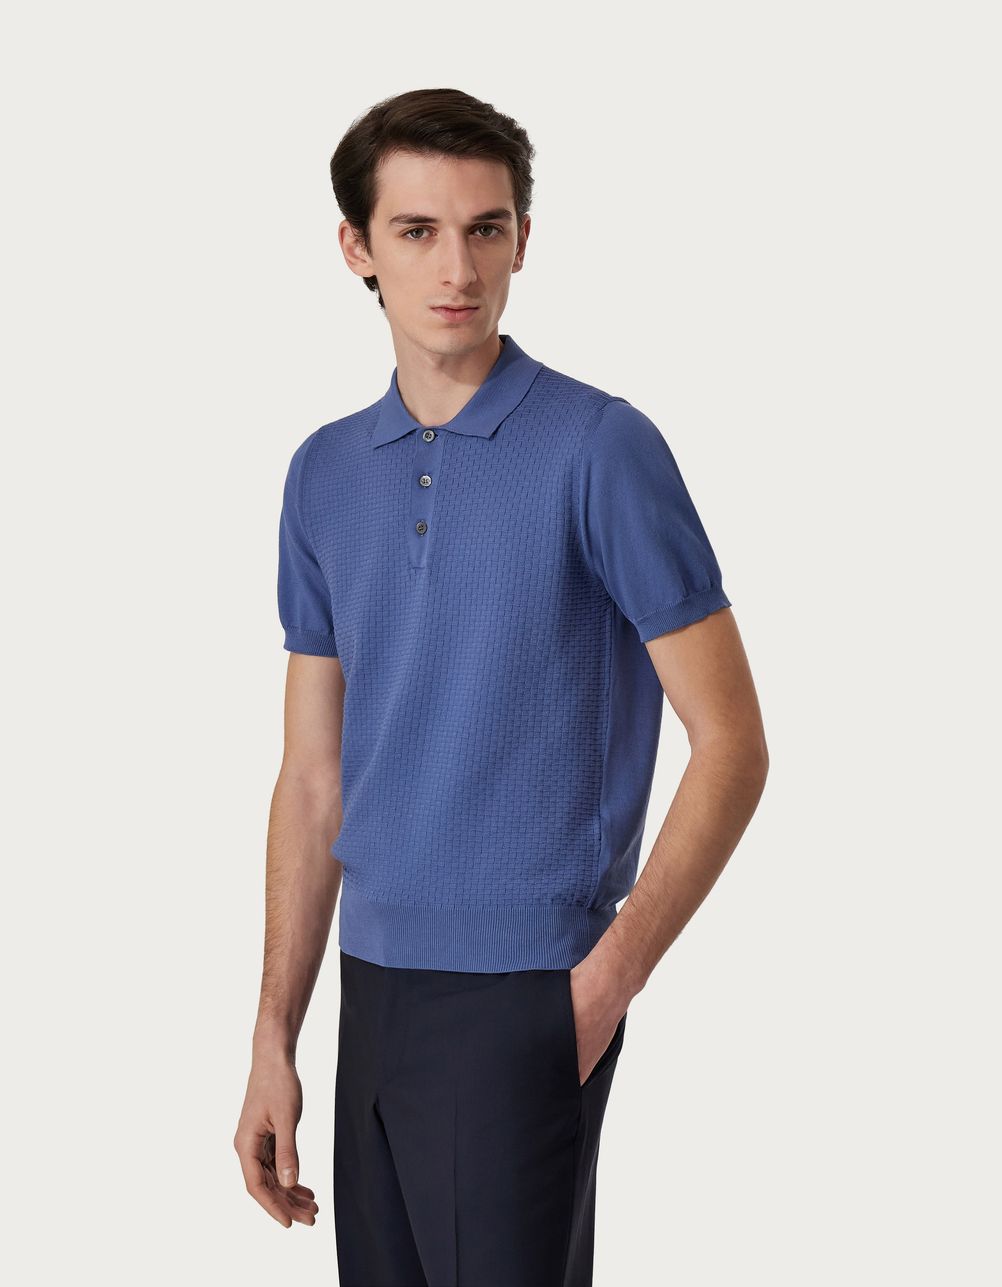 Air-force-blue polo shirt in garment-dyed cotton